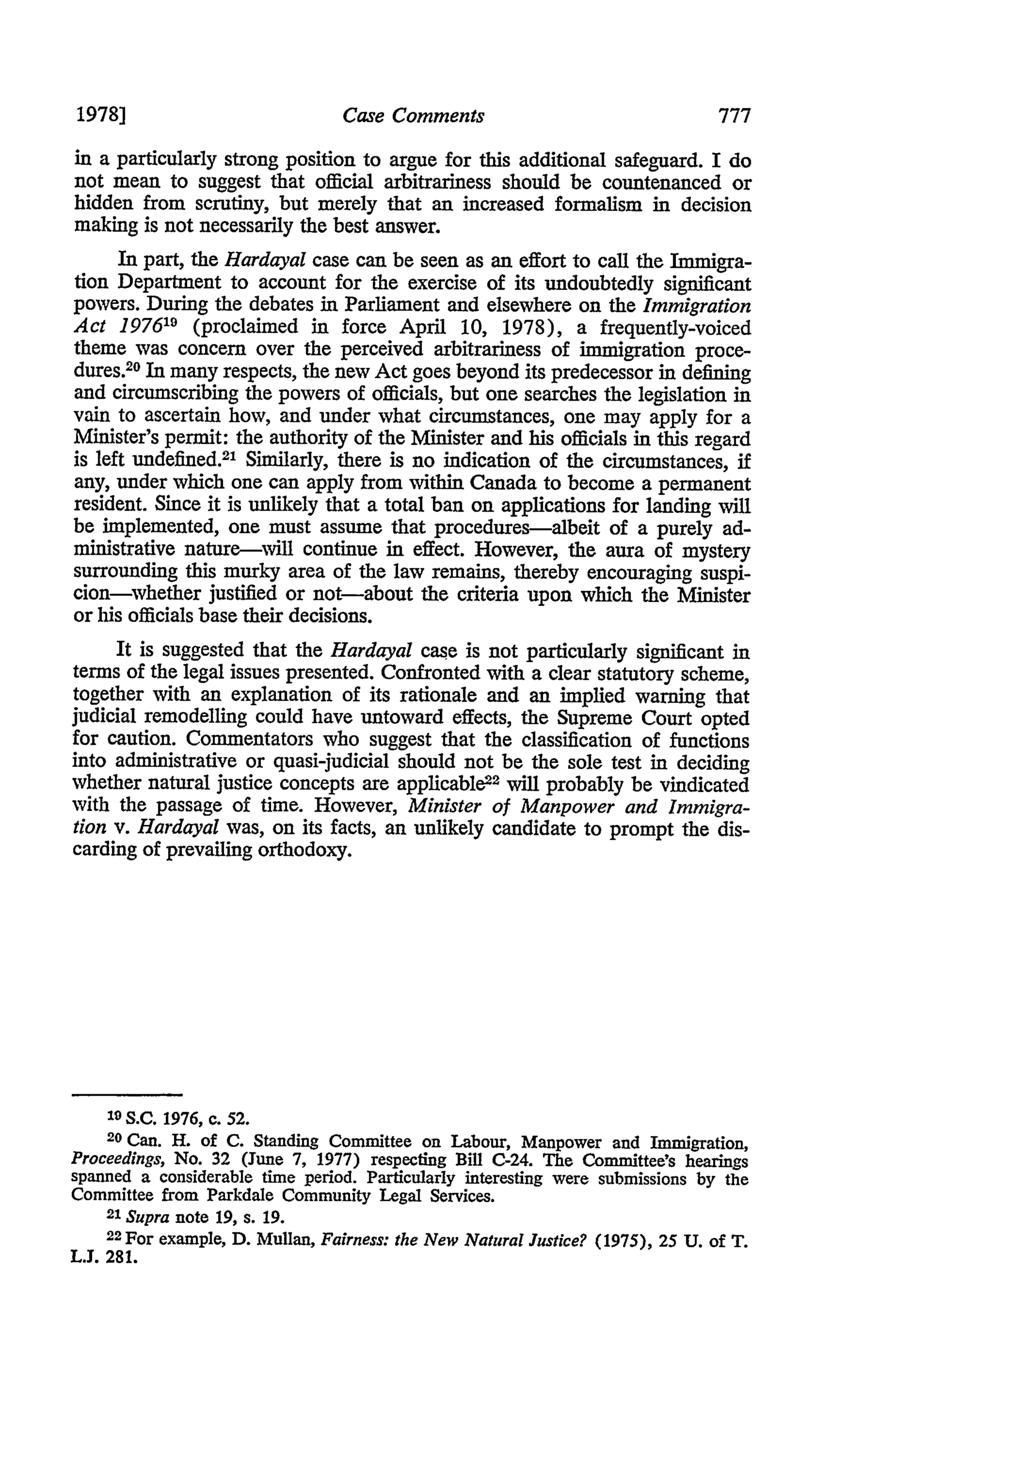 1978] Case Comments in a particularly strong position to argue for this additional safeguard.